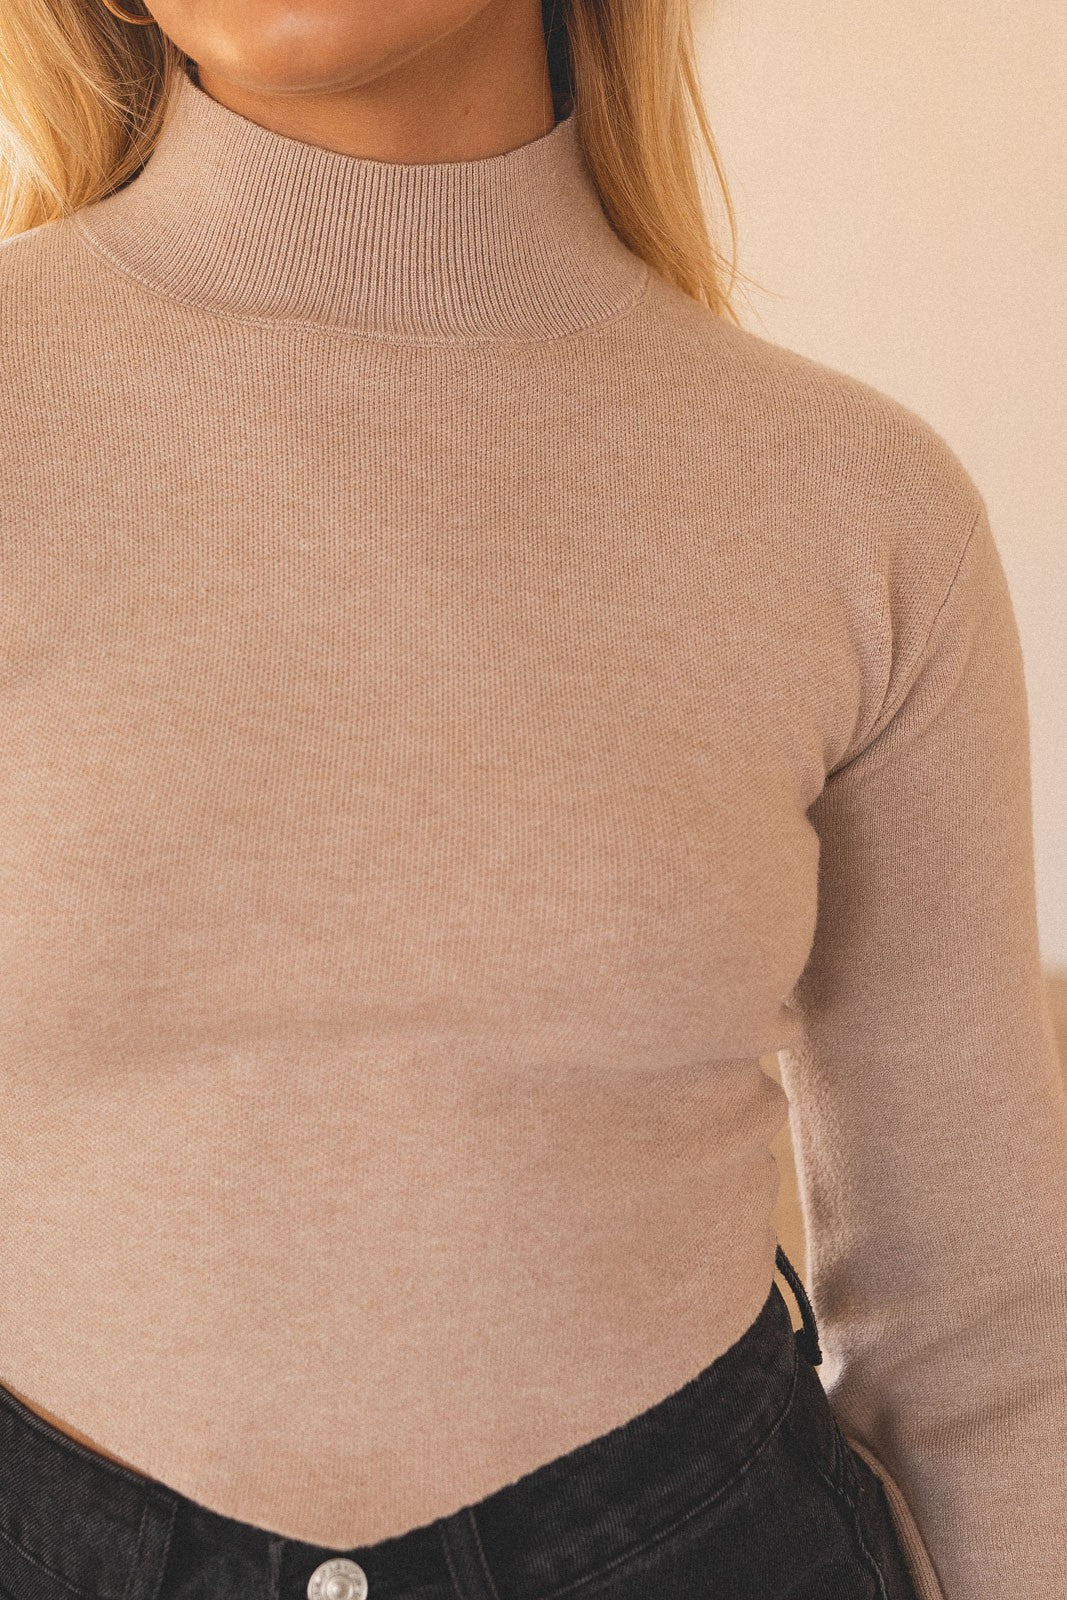 Social Battery Charged Sweater Taupe, Sweater by Le Lis | LIT Boutique